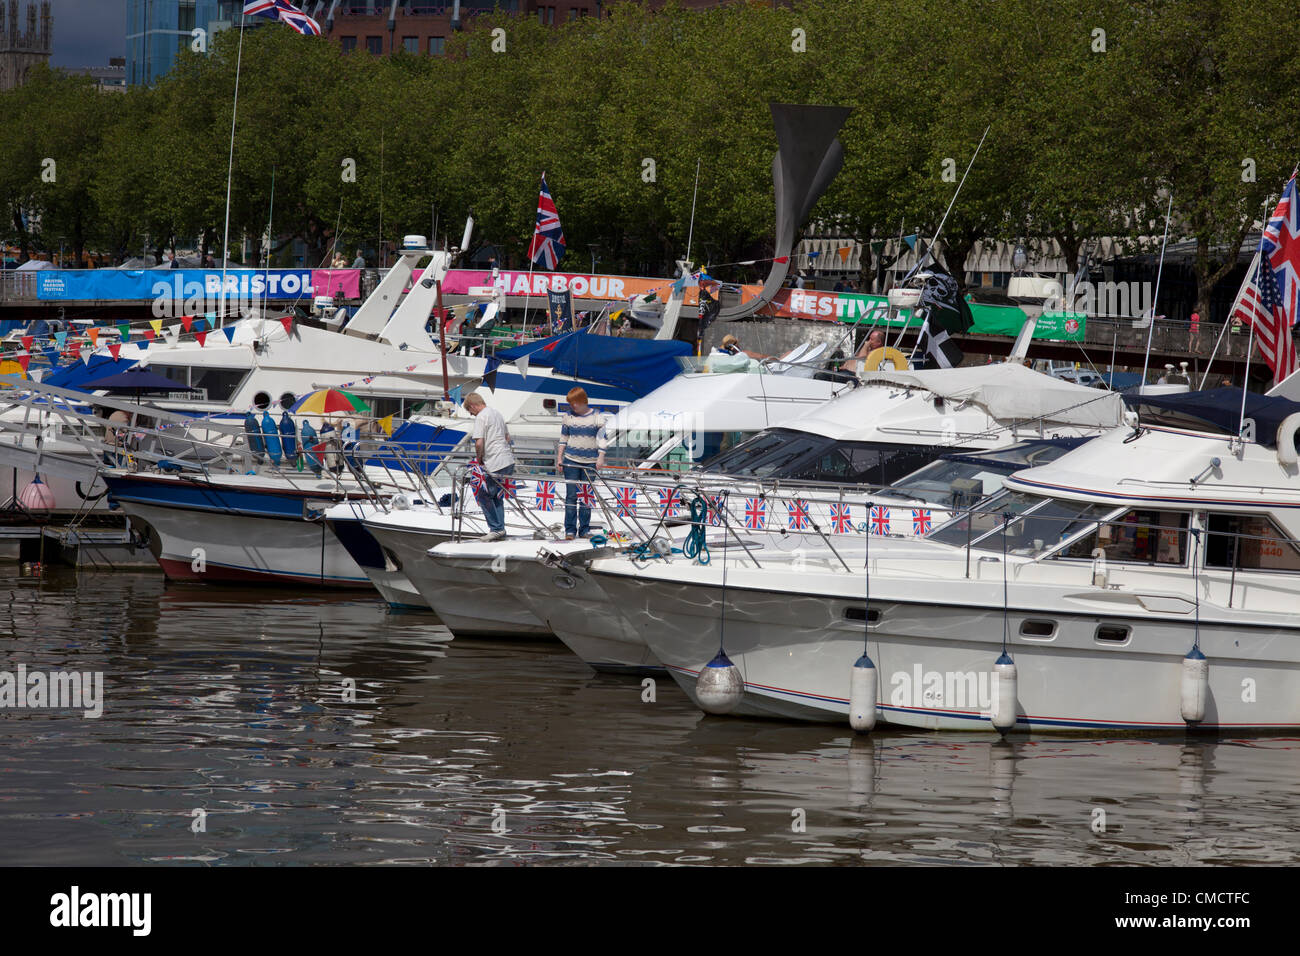 Preparations for The Bristol Harbour Festival, Bristol, UK Friday 20th July 2012 Stock Photo